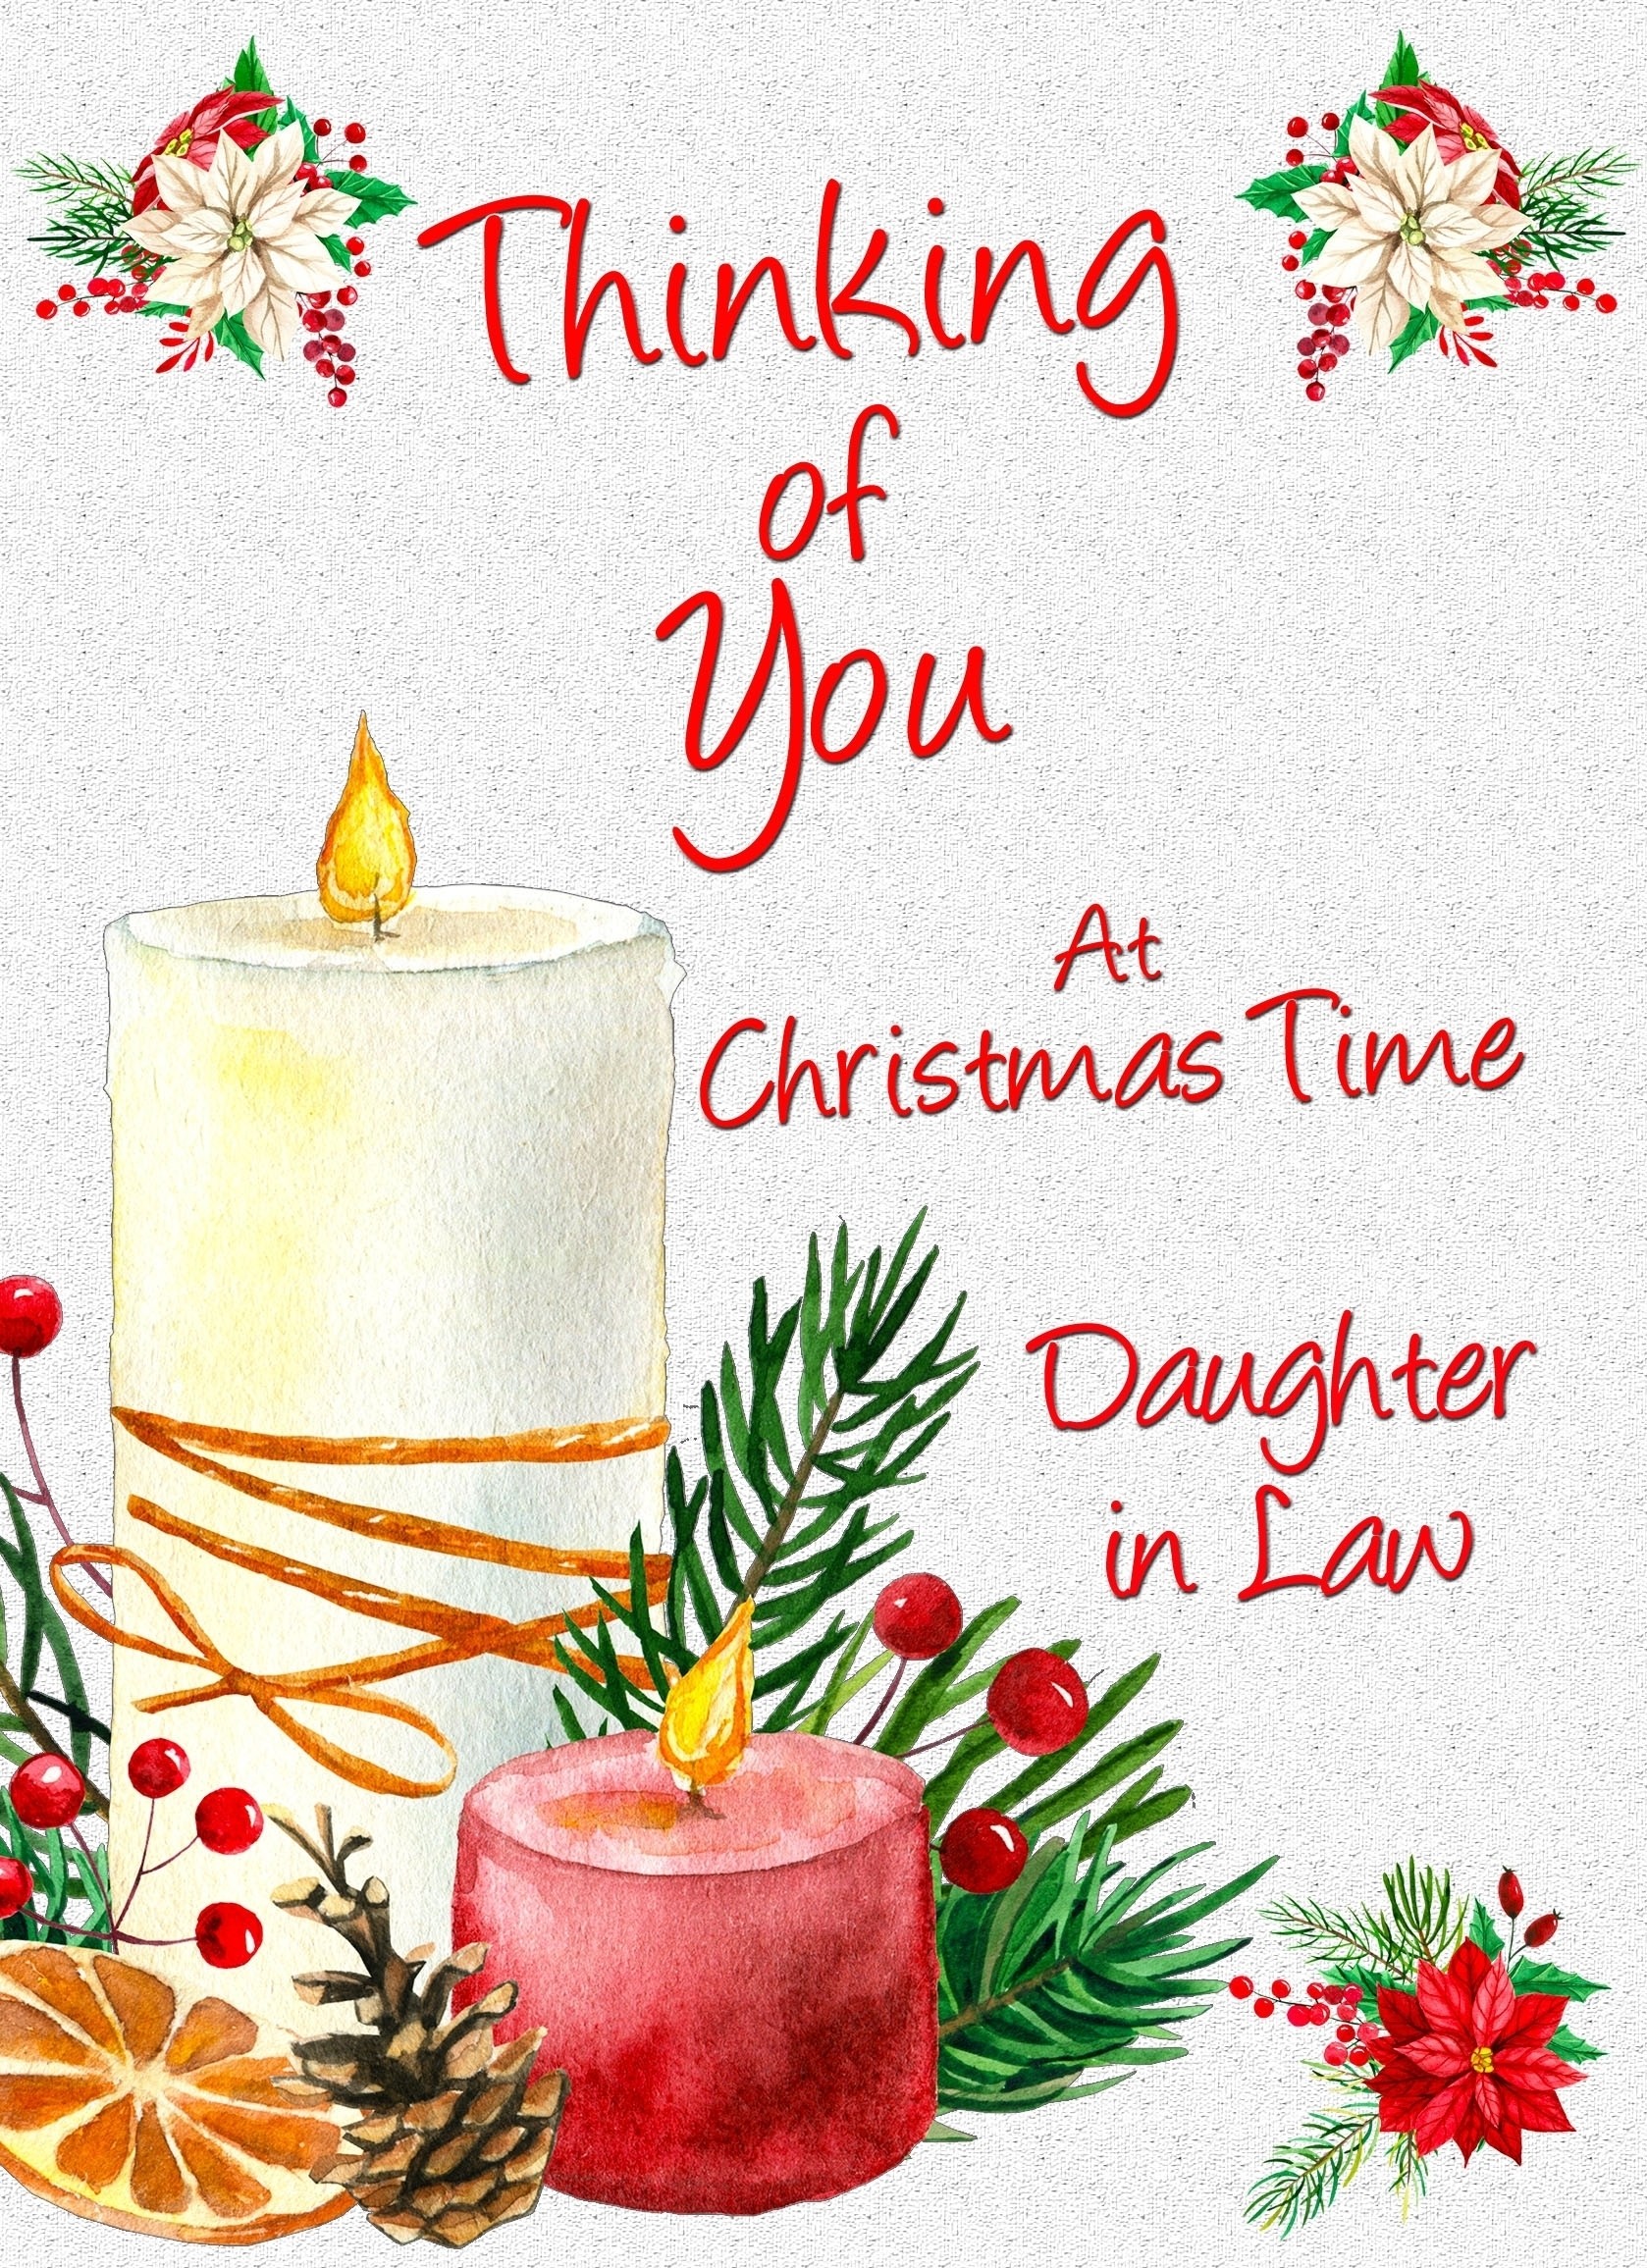 Thinking of You at Christmas Card For Daughter in Law (Candle)